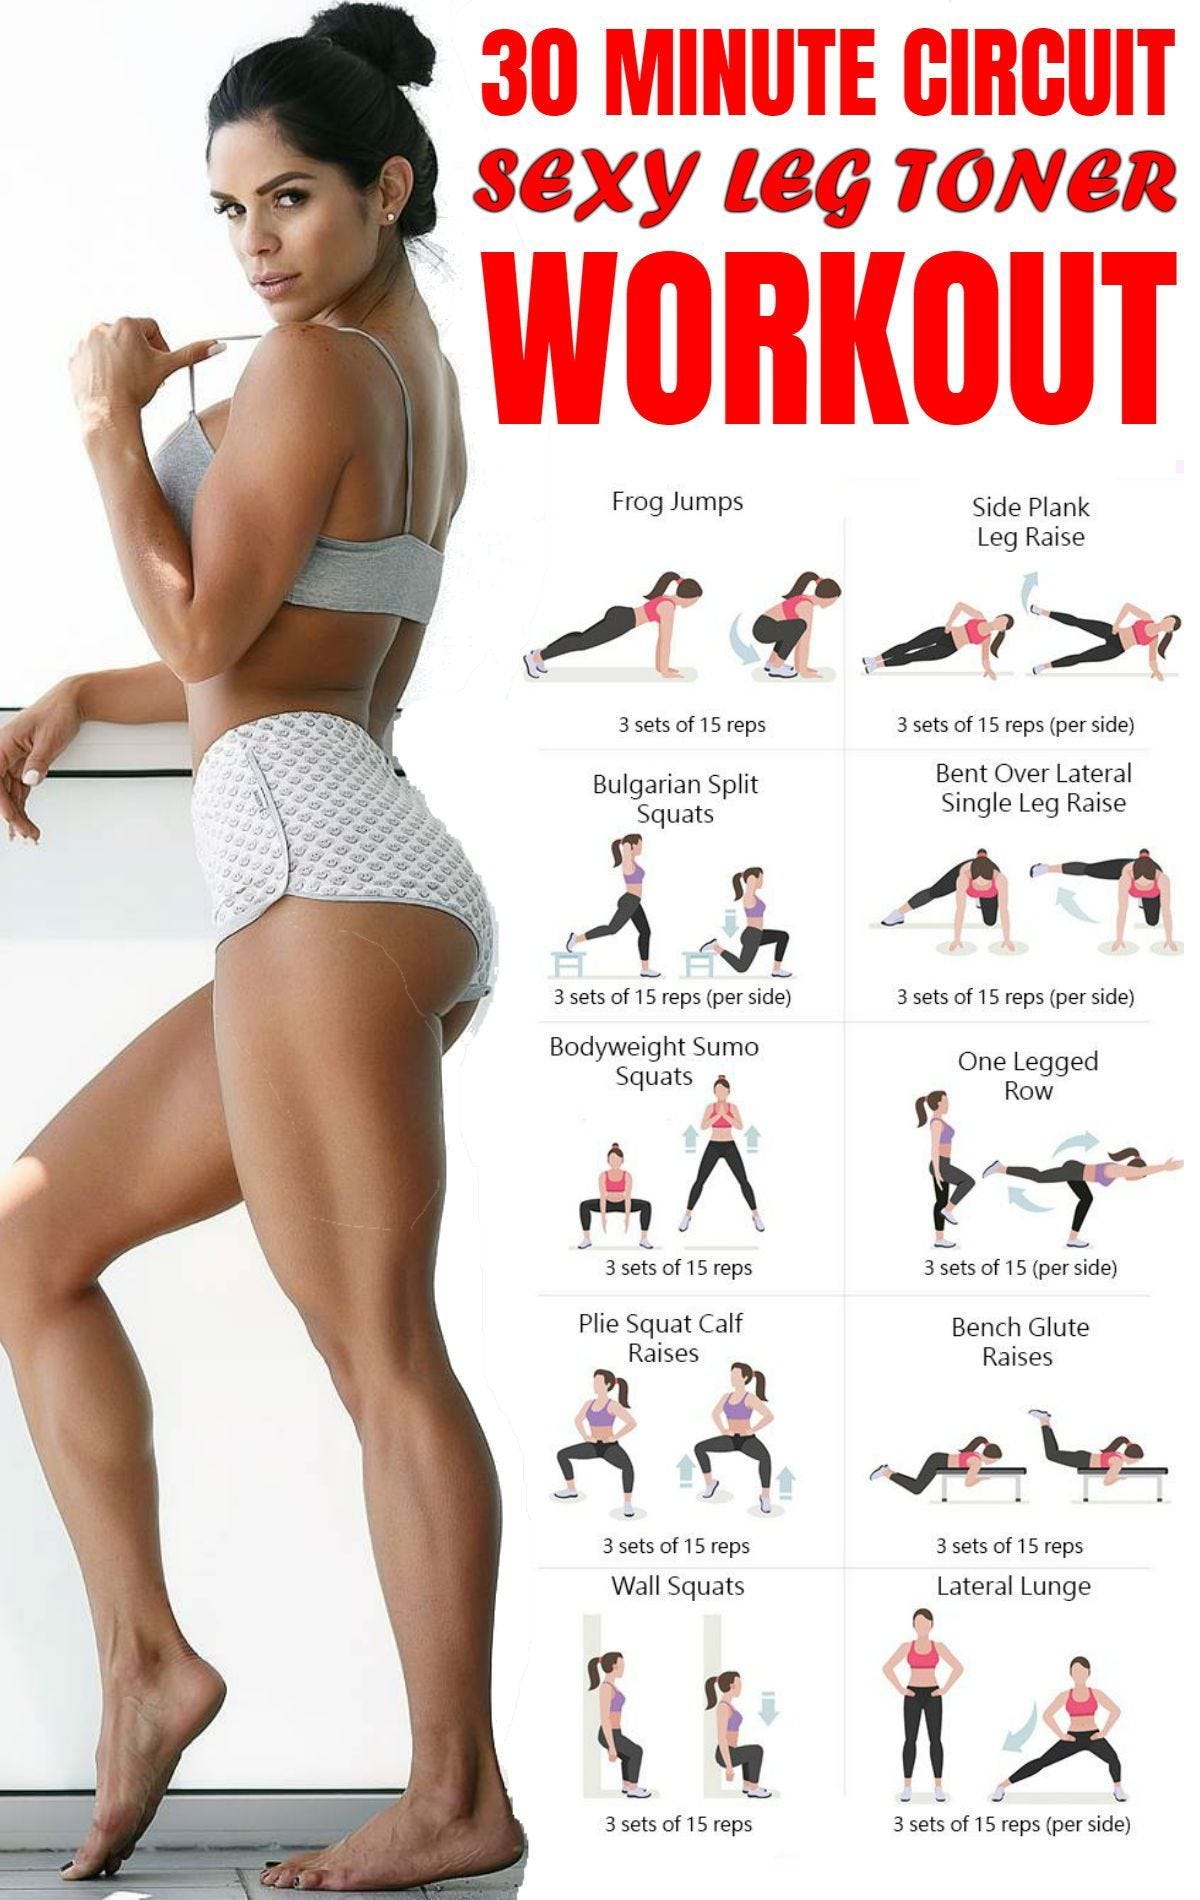 12 Ways to Get a Good Leg Workout at Home, by ADEYEMI OPEYEMI